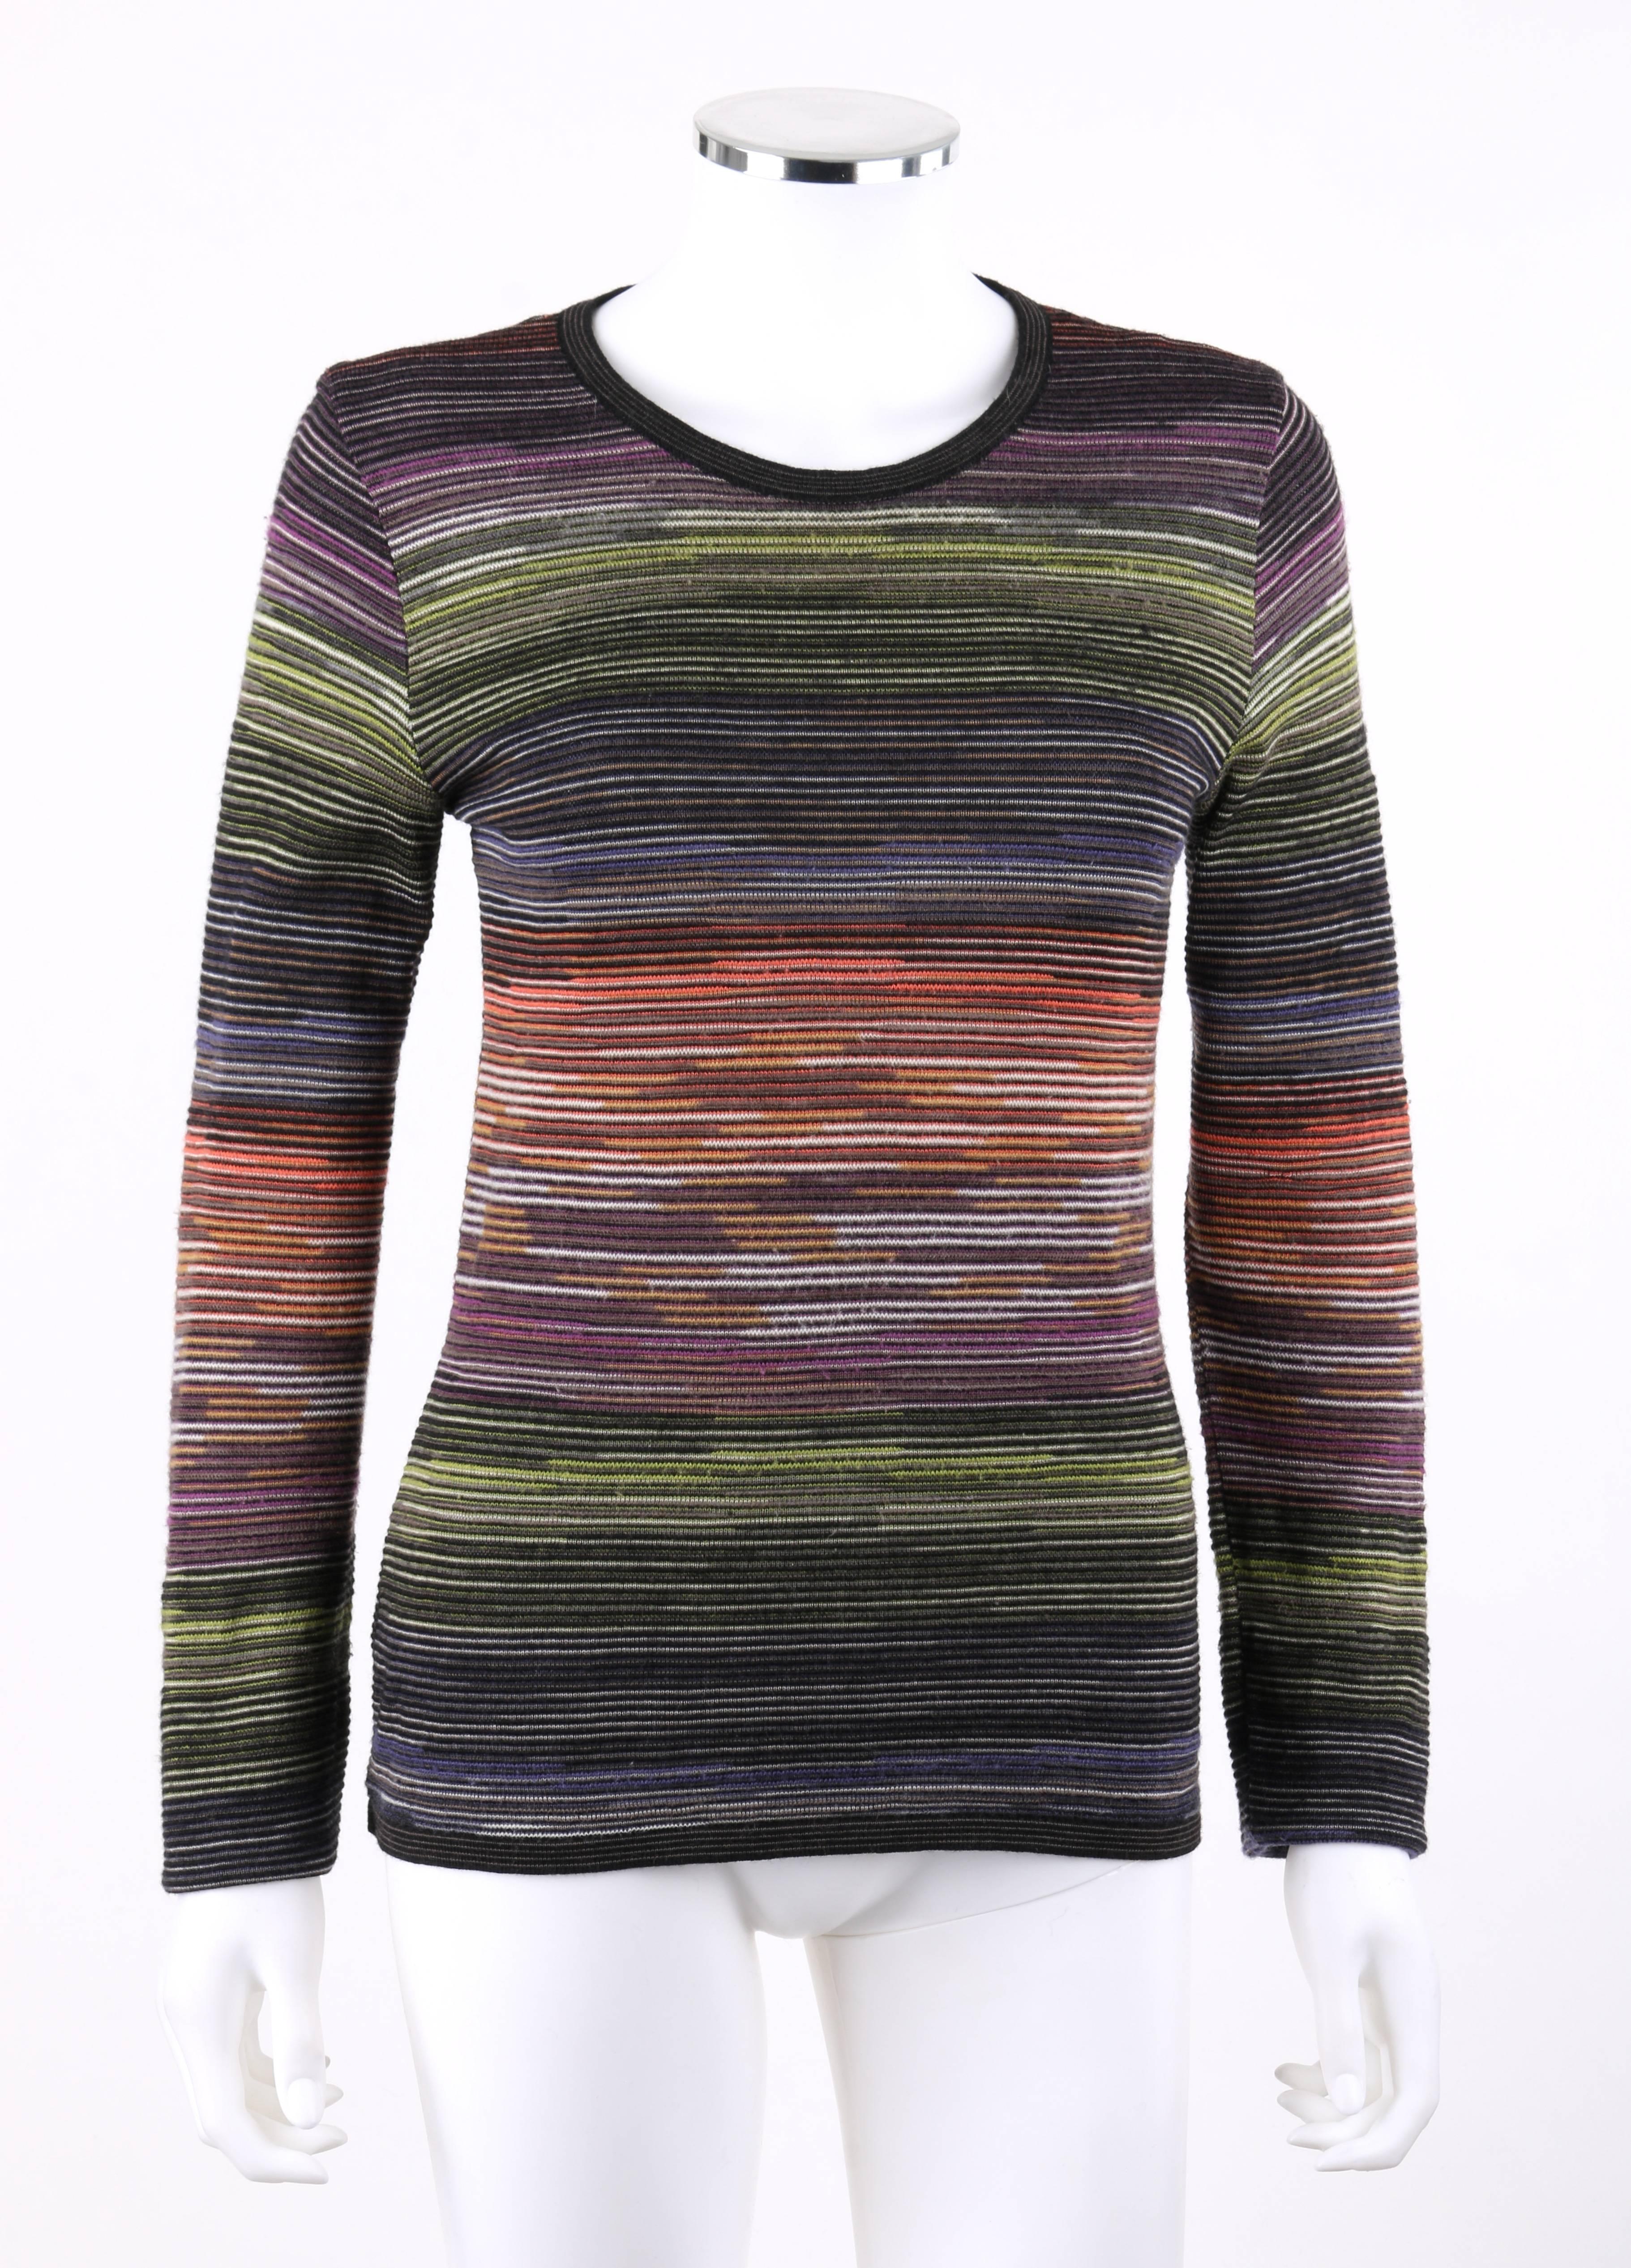 Missoni Sport rainbow striped wool knit long sleeve crew neck top. Crew neckline. Long sleeves. Black and gray striped rib knit detail at neckline, cuffs, and hem. Pullover style. Unlined. Marked Fabric Content: 